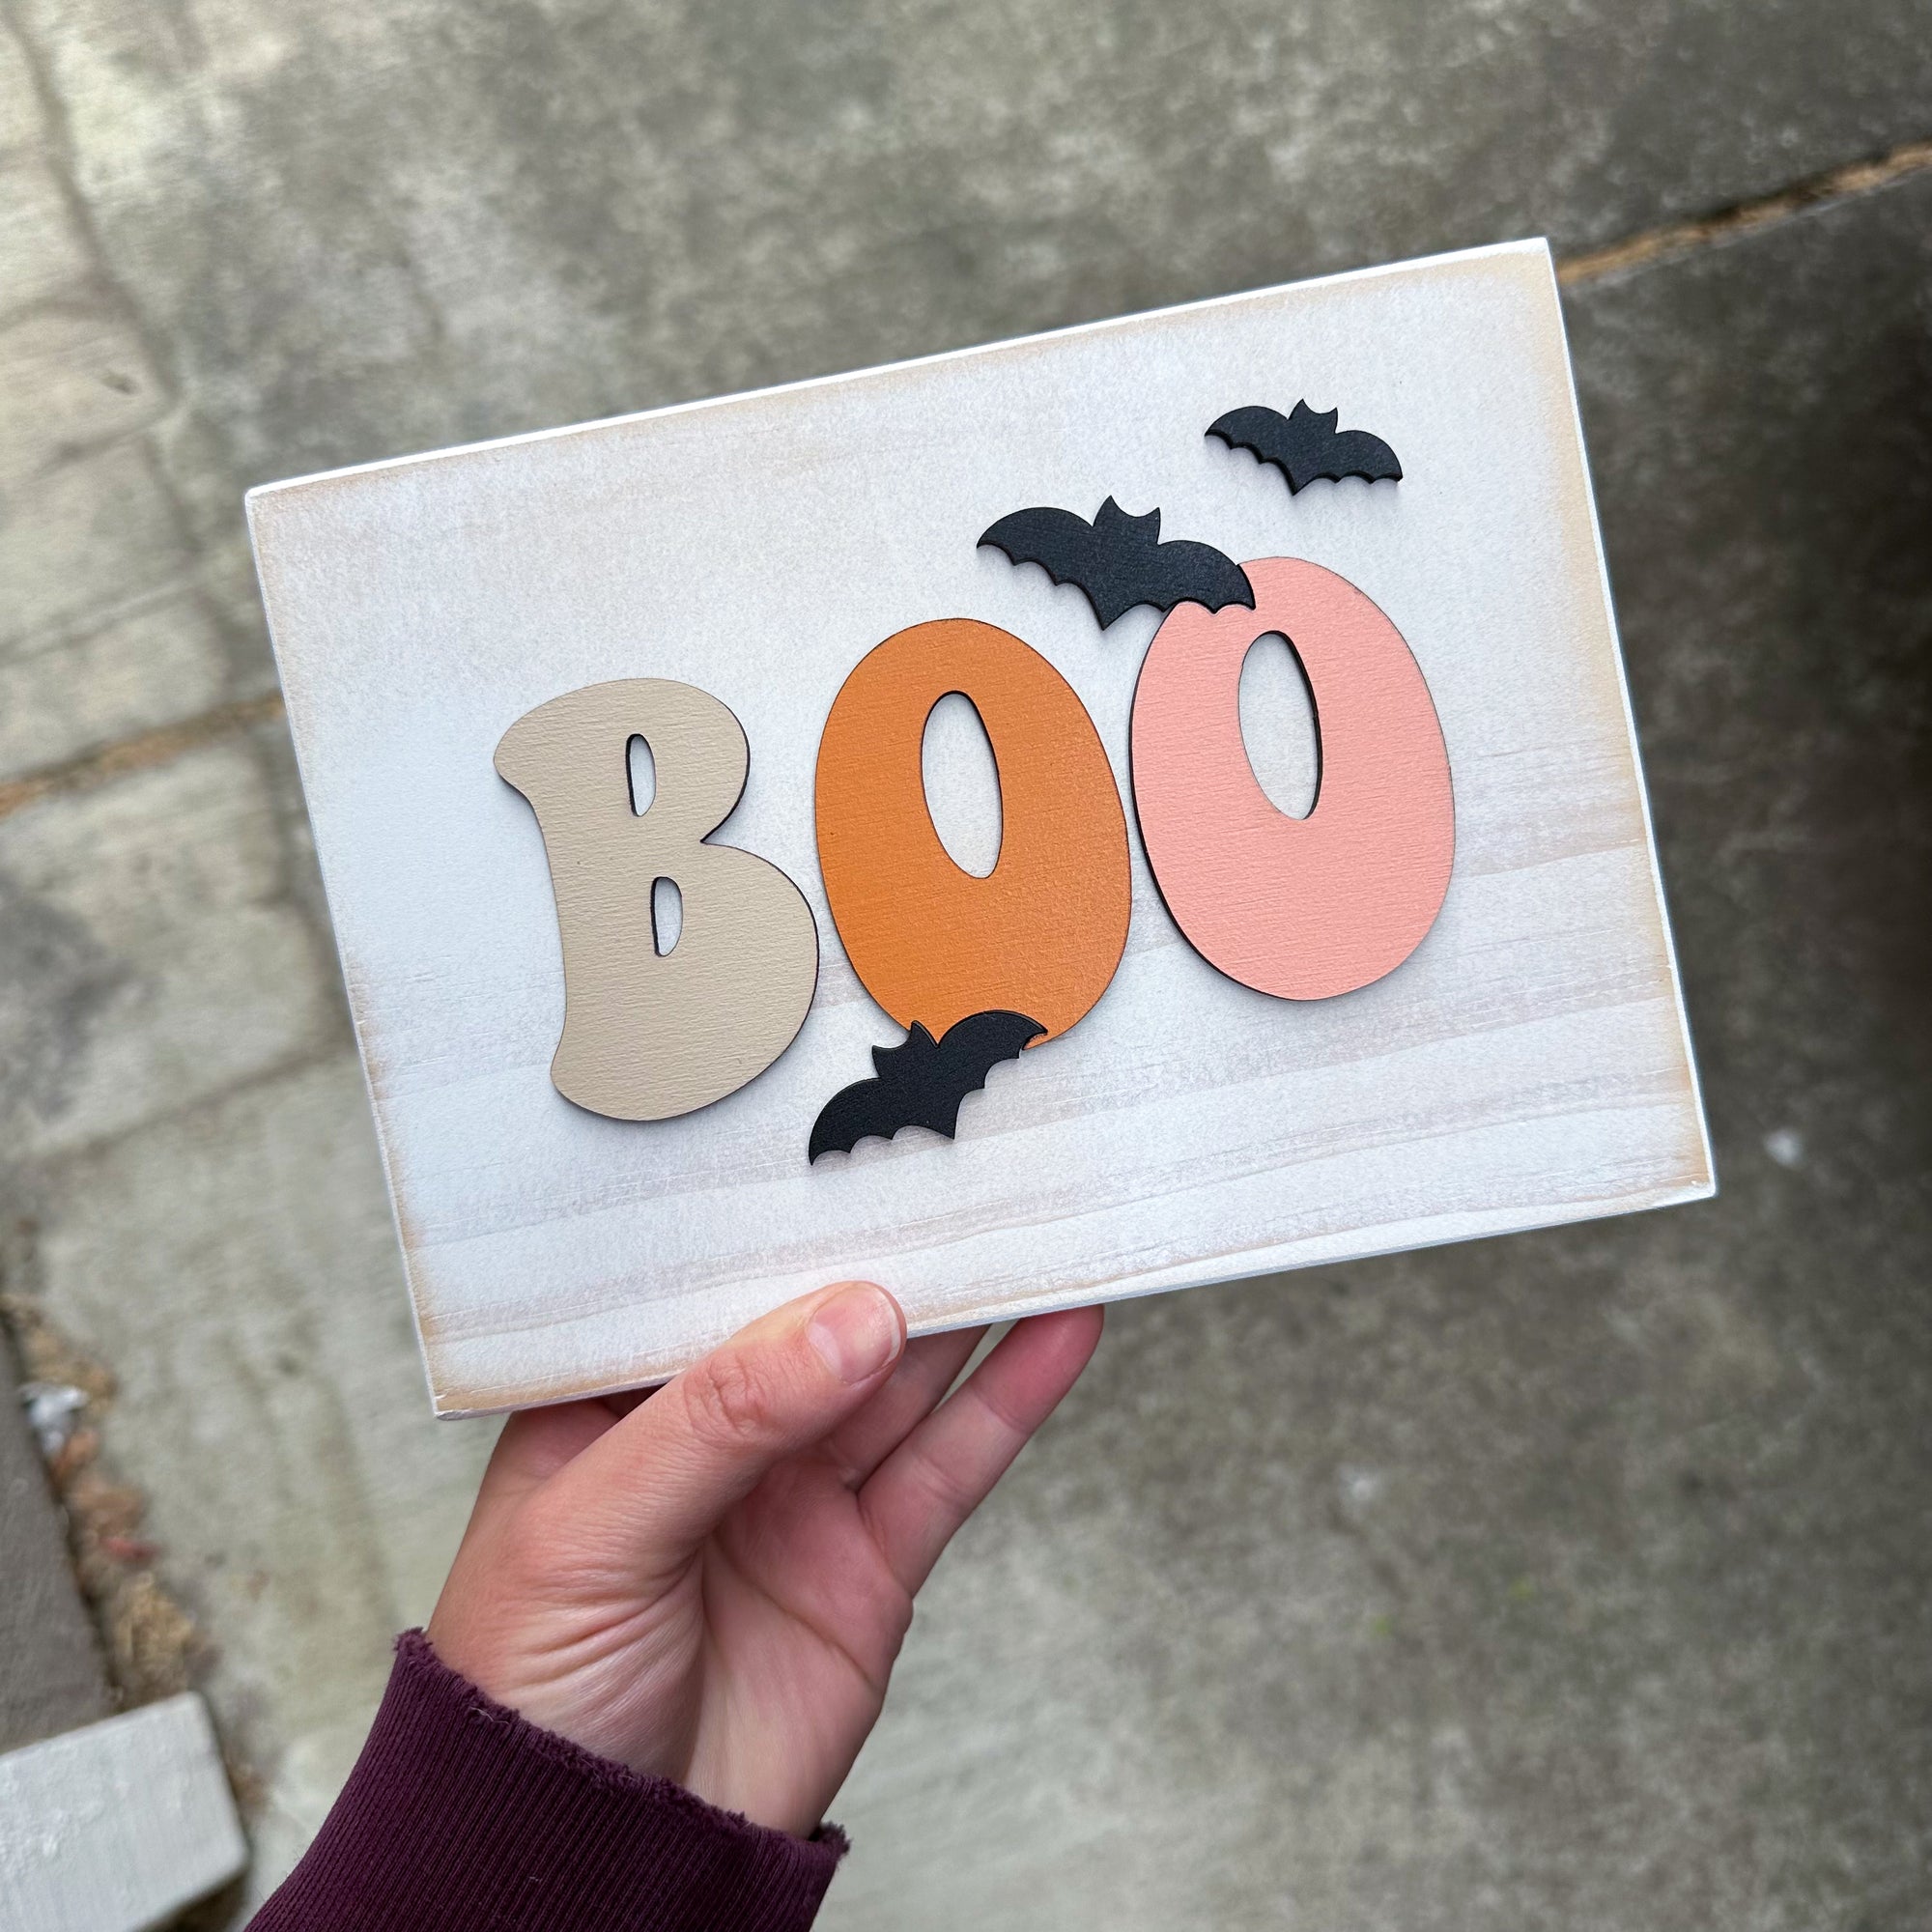 Boo sign